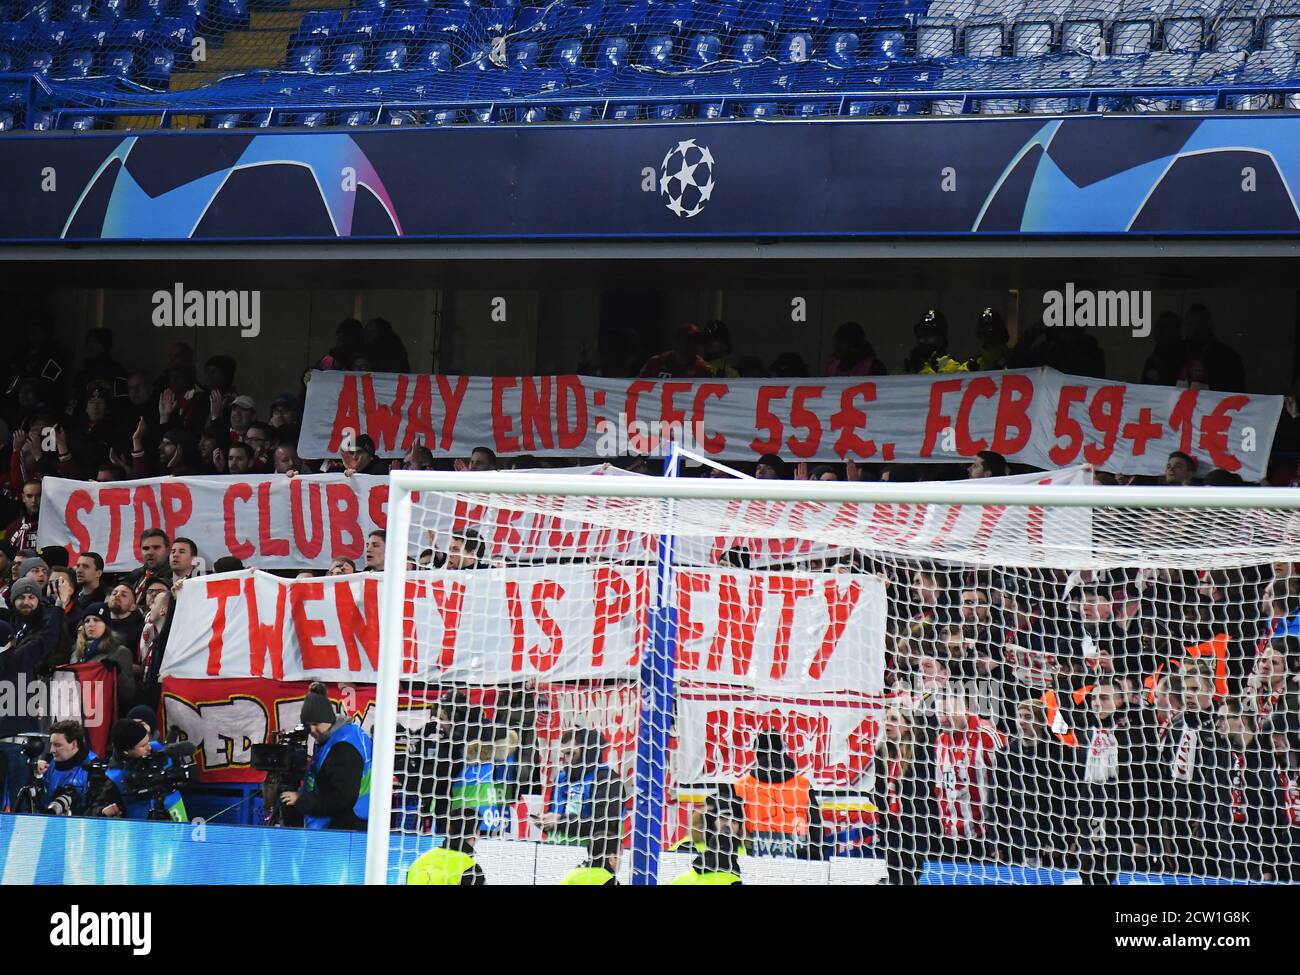 London England February 26 2020 Bayern Fans Display A Protest Banner During The 2019 20 Uefa Champions League Round Of 16 Game Between Chelsea Fc And Bayern Munich At Stamford Bridge Stock Photo Alamy